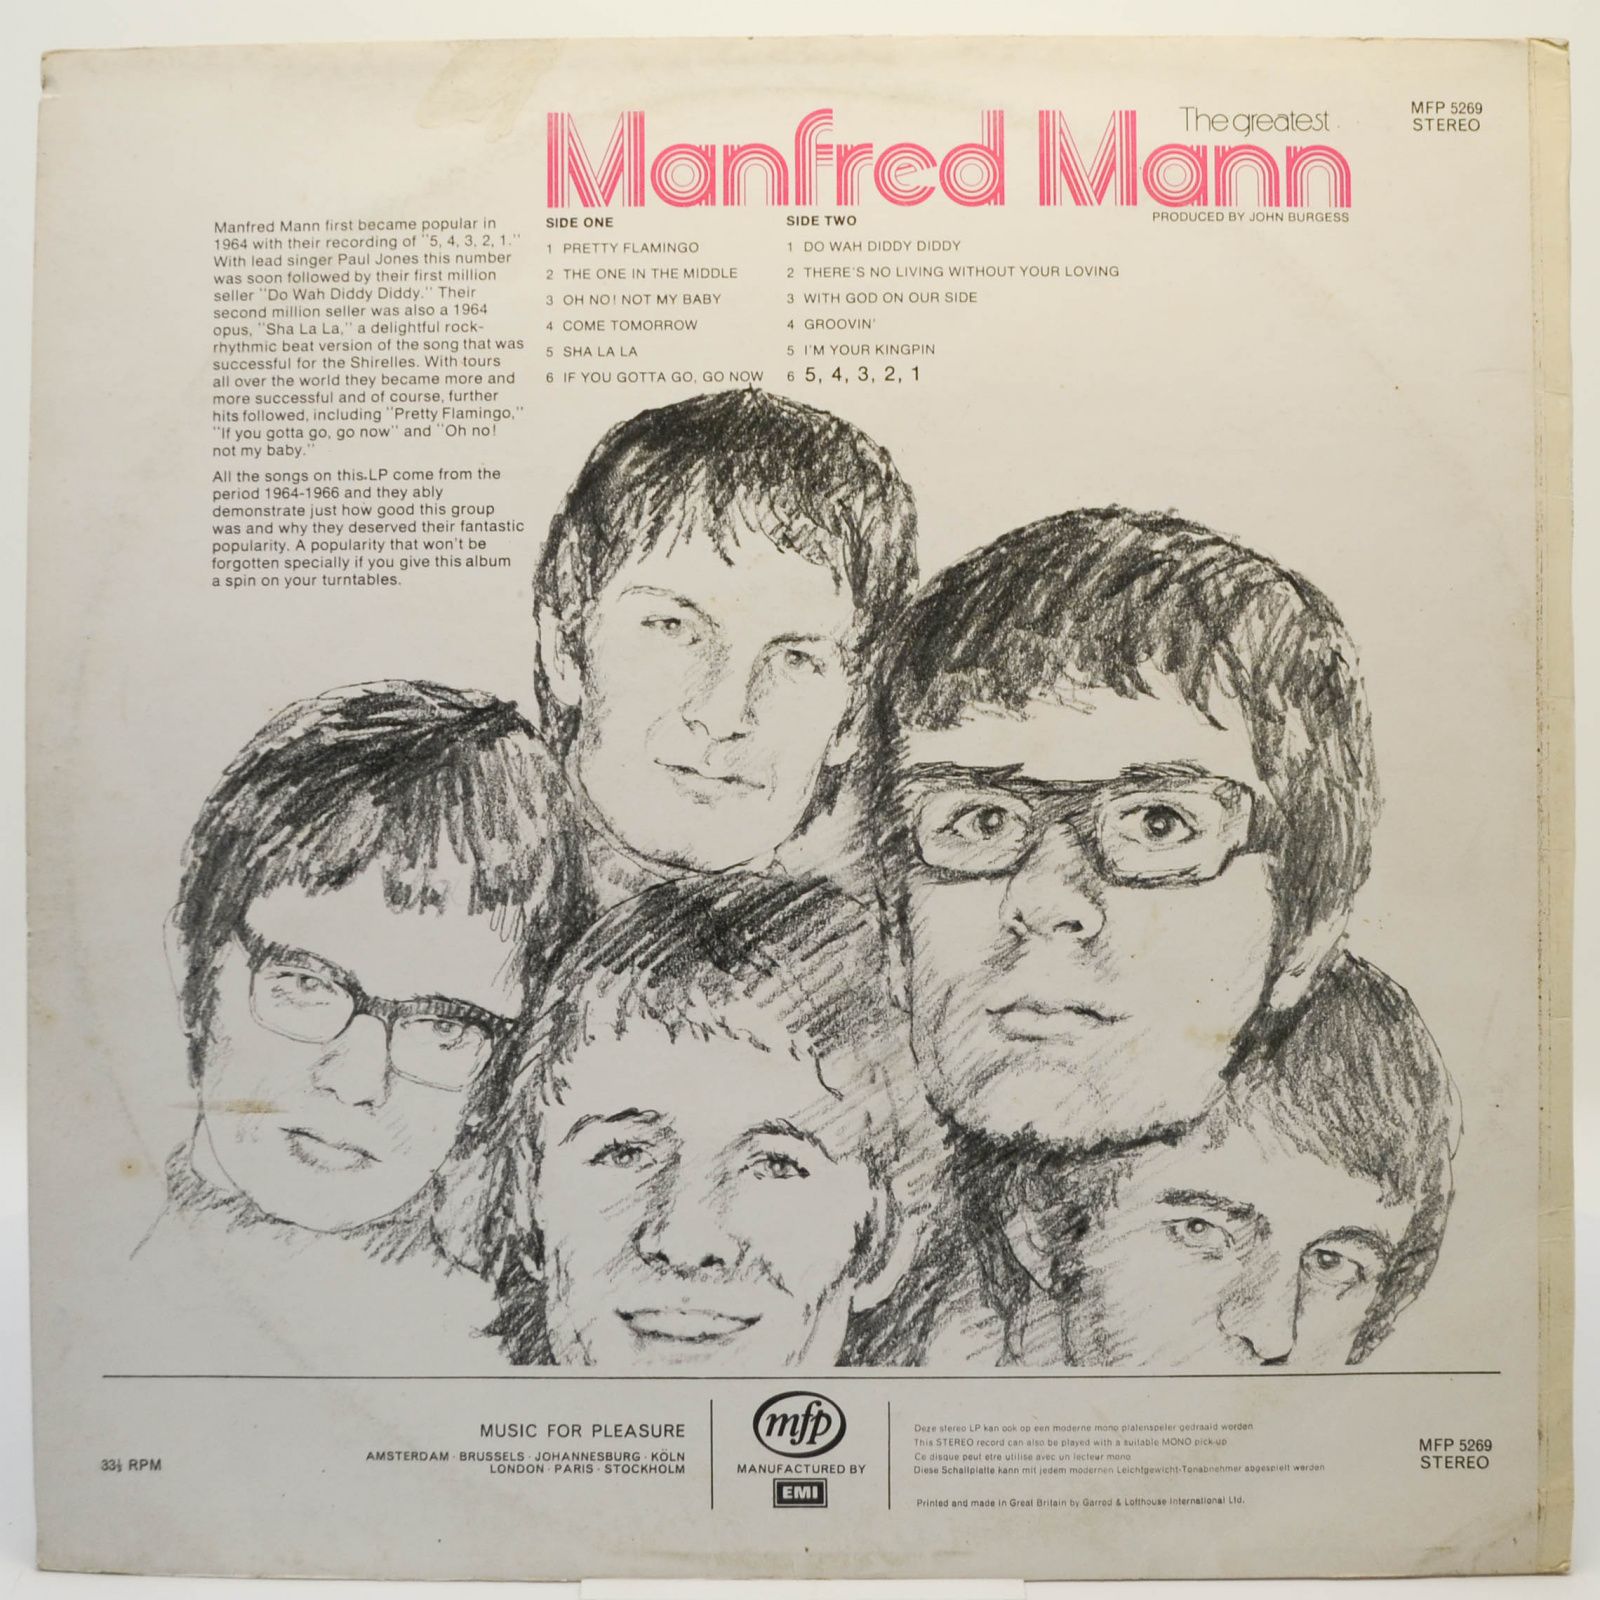 Manfred Mann — The Greatest, 1972